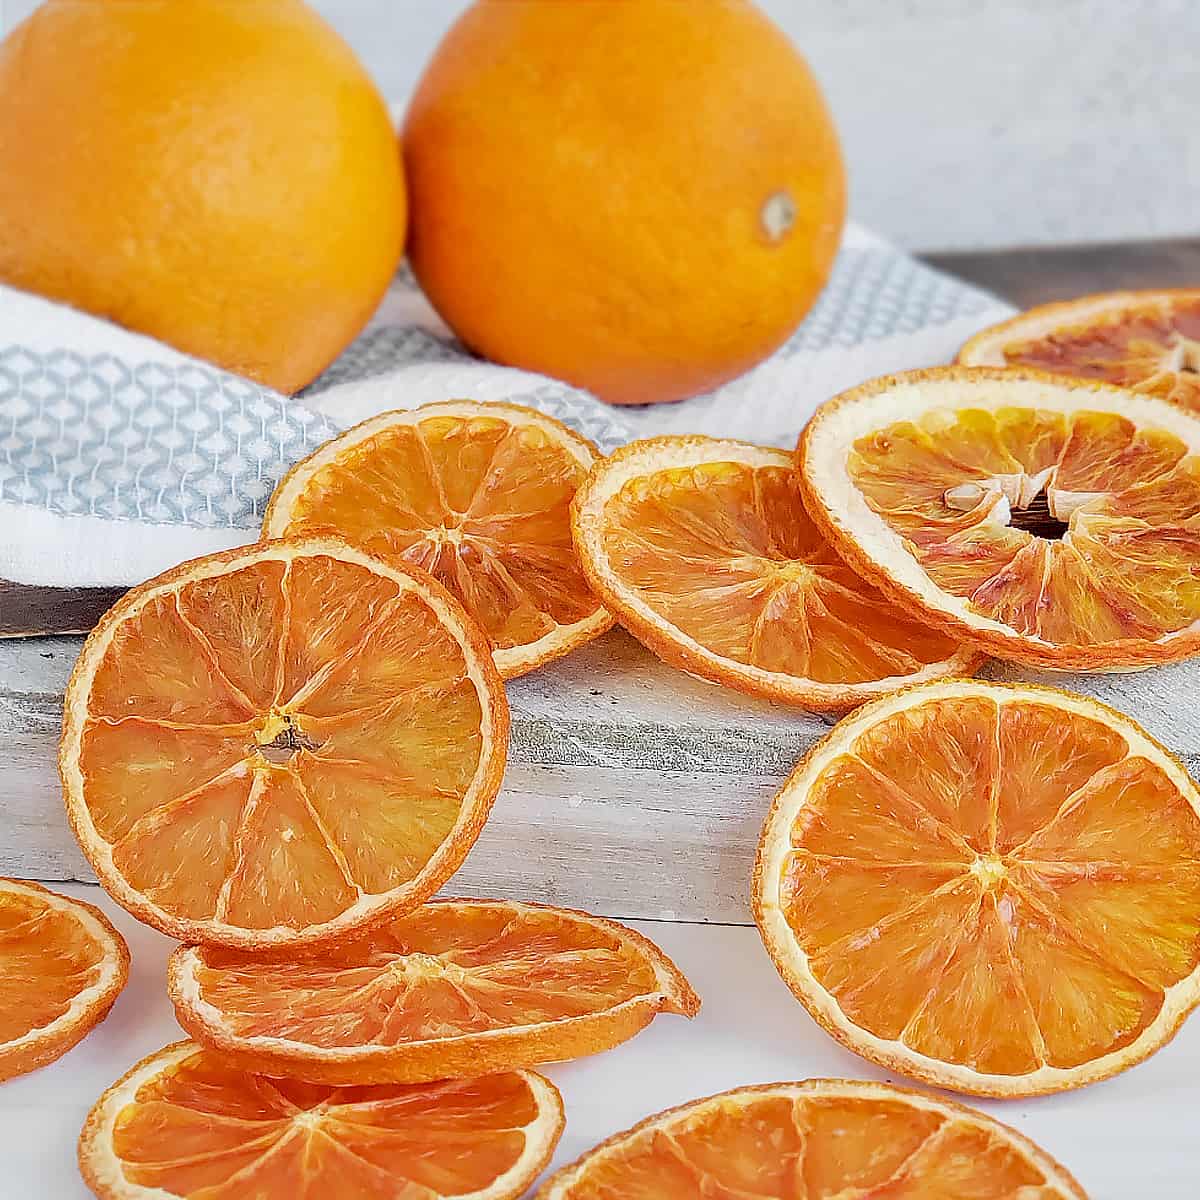 Fresh oranges with sliced dried oranges across the surface